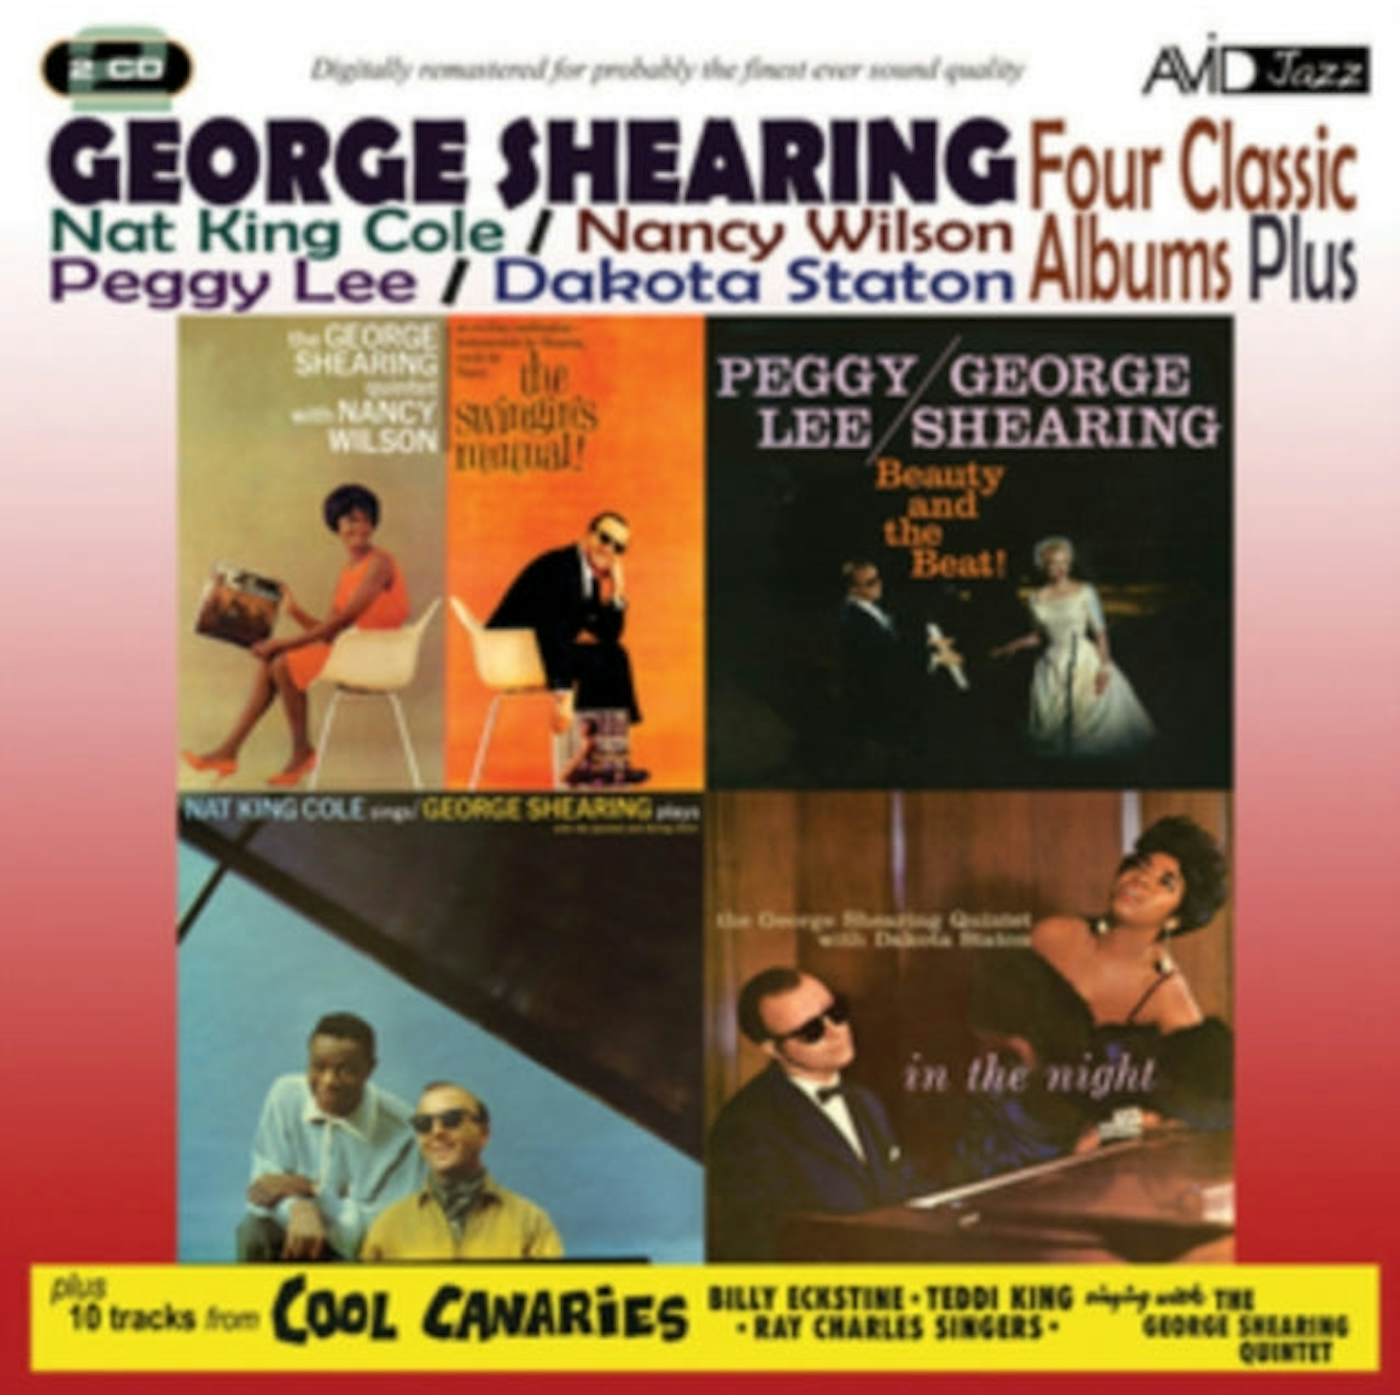 George Shearing CD - Four Classic Albums Plus